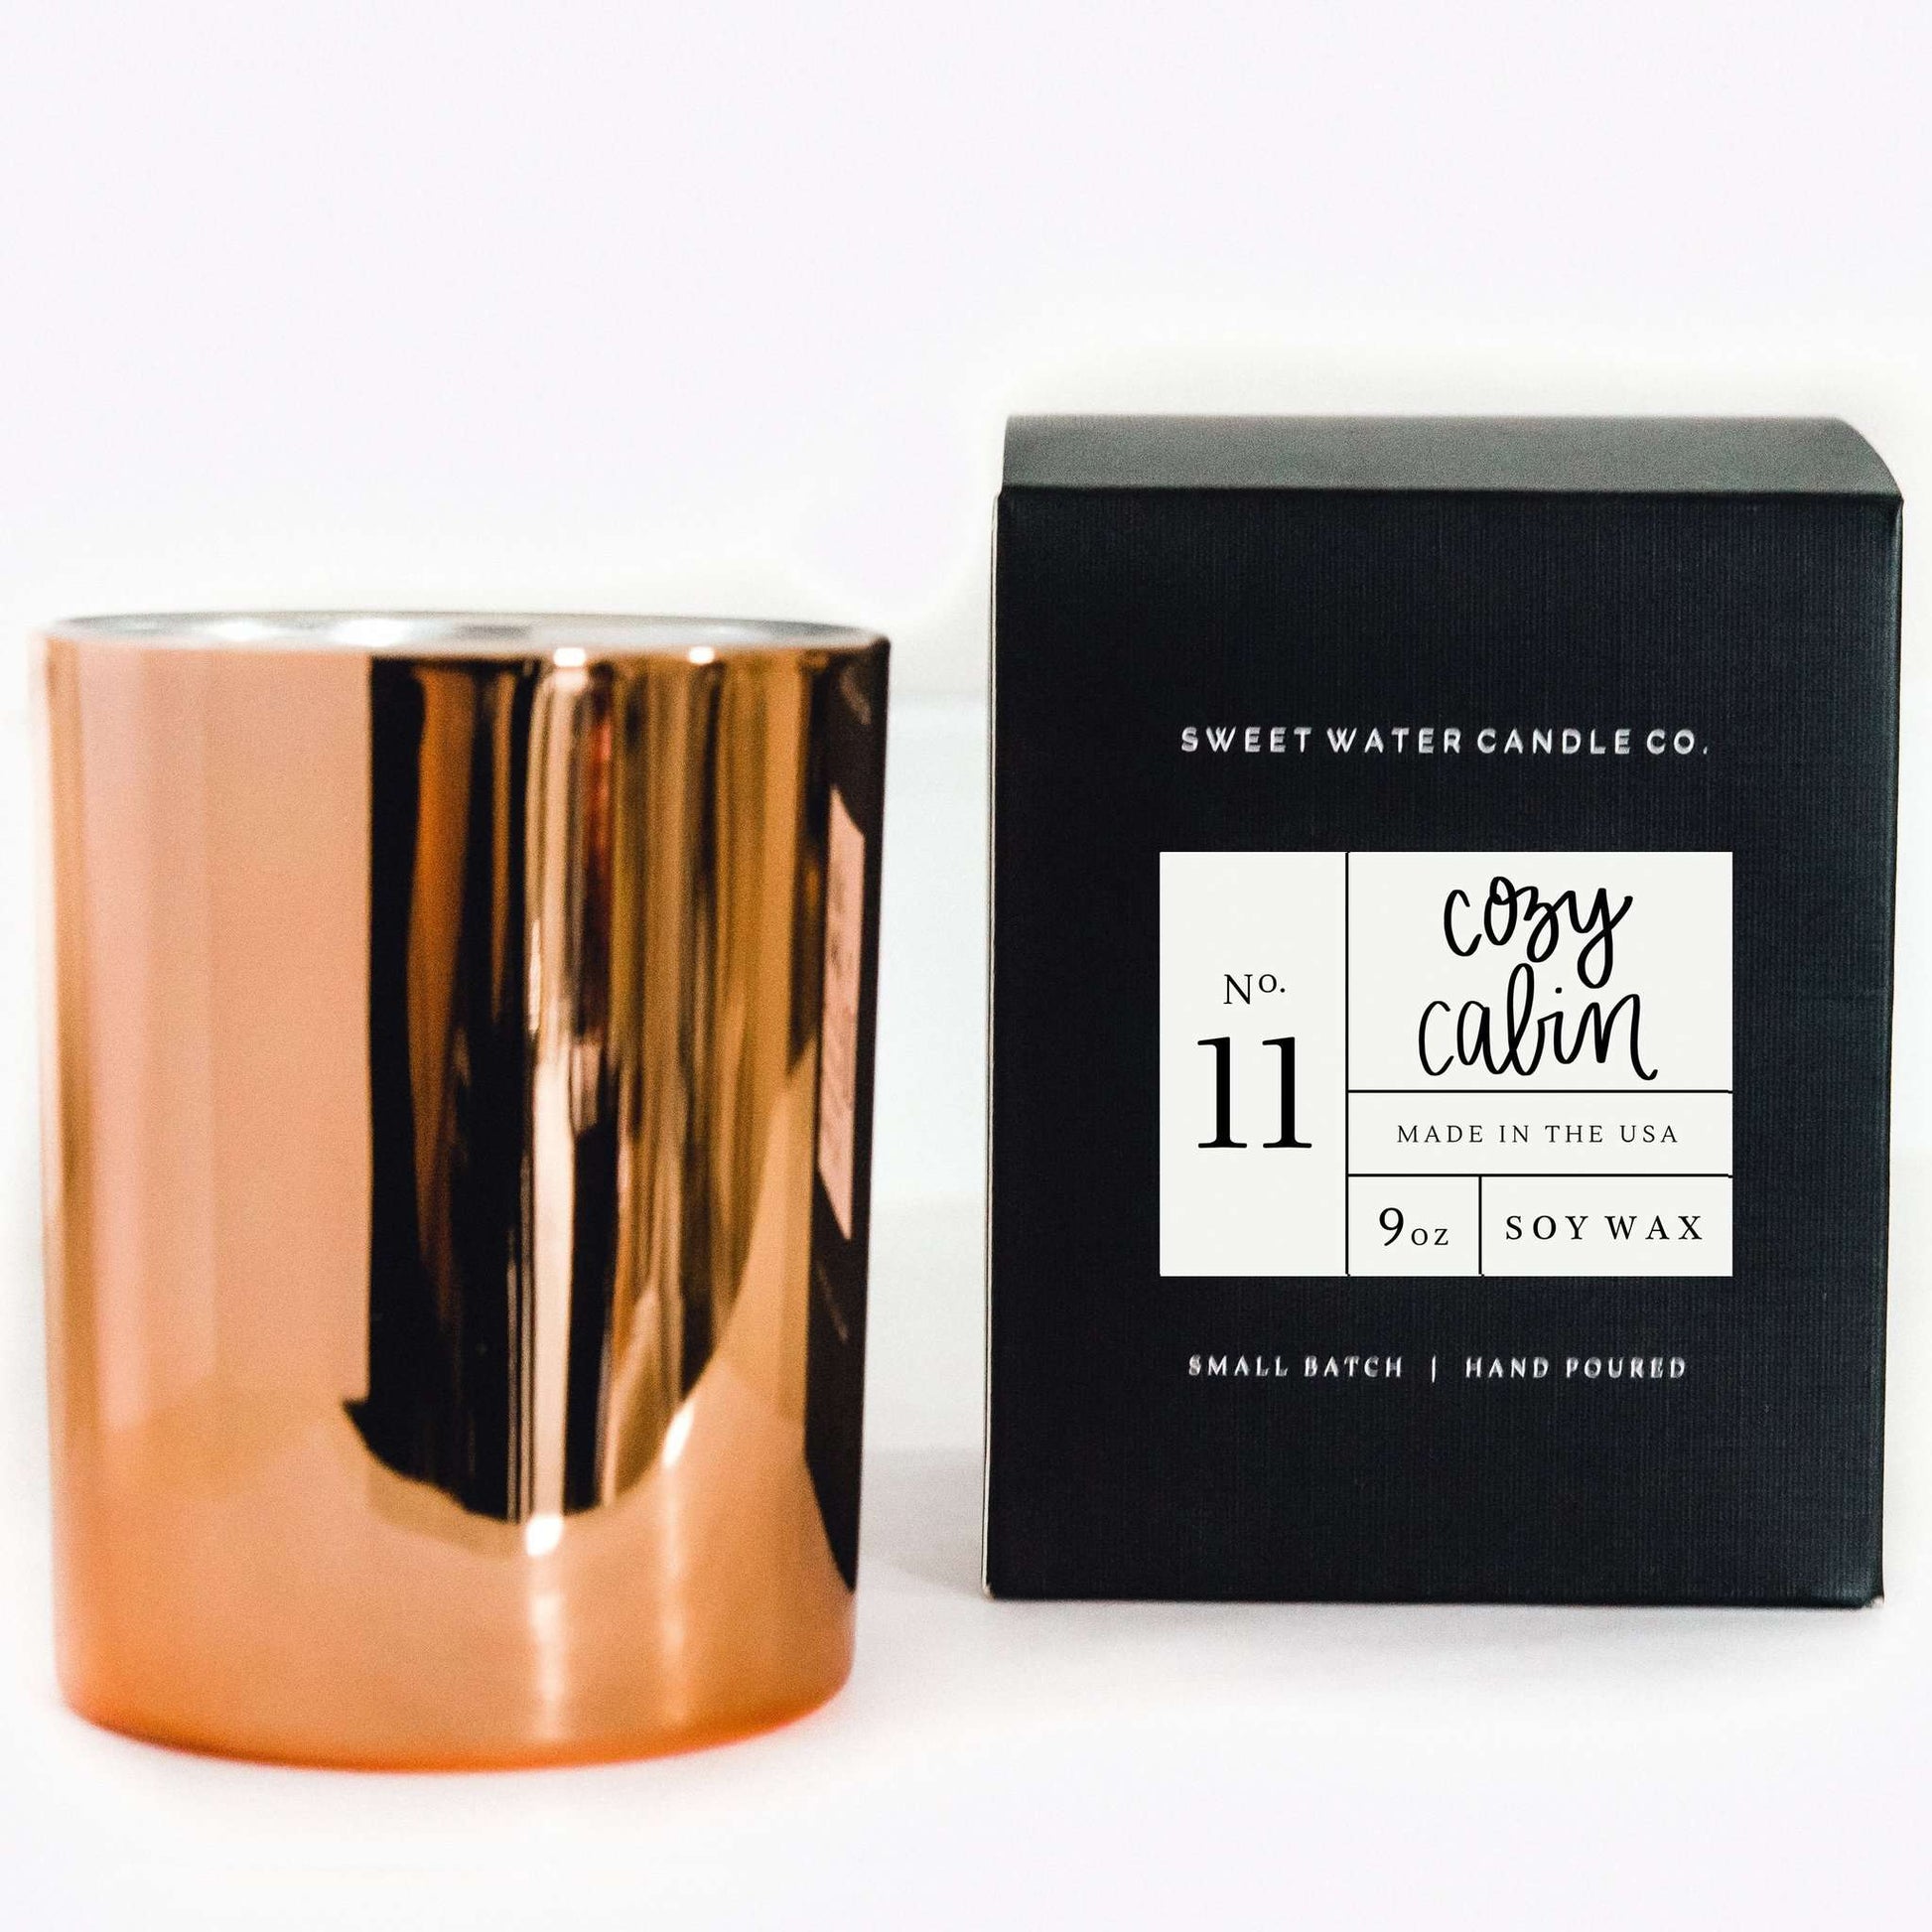 Cozy Cabin scented candle in a rose gold jar